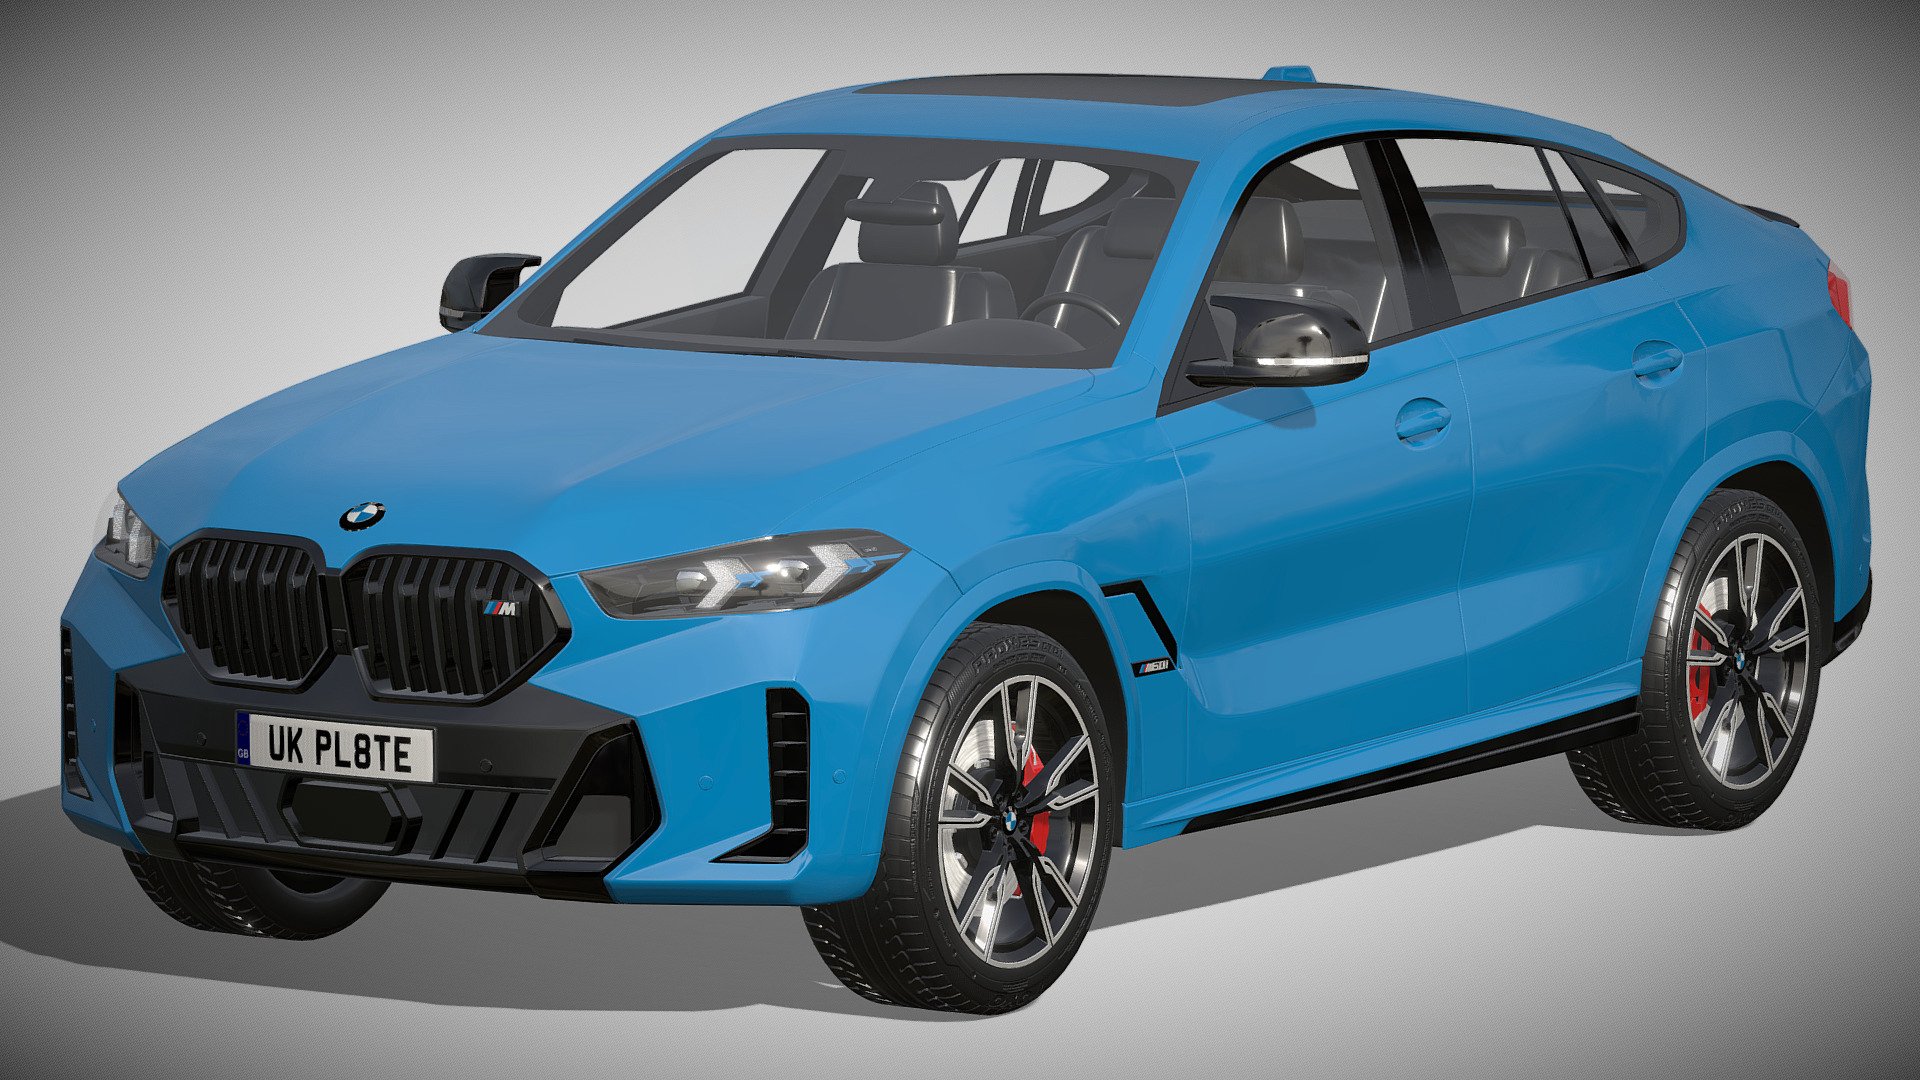 BMW X6 M60i 2023

https://www.bmw.de/de/neufahrzeuge/x/x6/2023/bmw-x6-ueberblick.html

Clean geometry Light weight model, yet completely detailed for HI-Res renders. Use for movies, Advertisements or games

Corona render and materials

All textures include in *.rar files

Lighting setup is not included in the file! - BMW X6 M60i 2023 - Buy Royalty Free 3D model by zifir3d 3d model